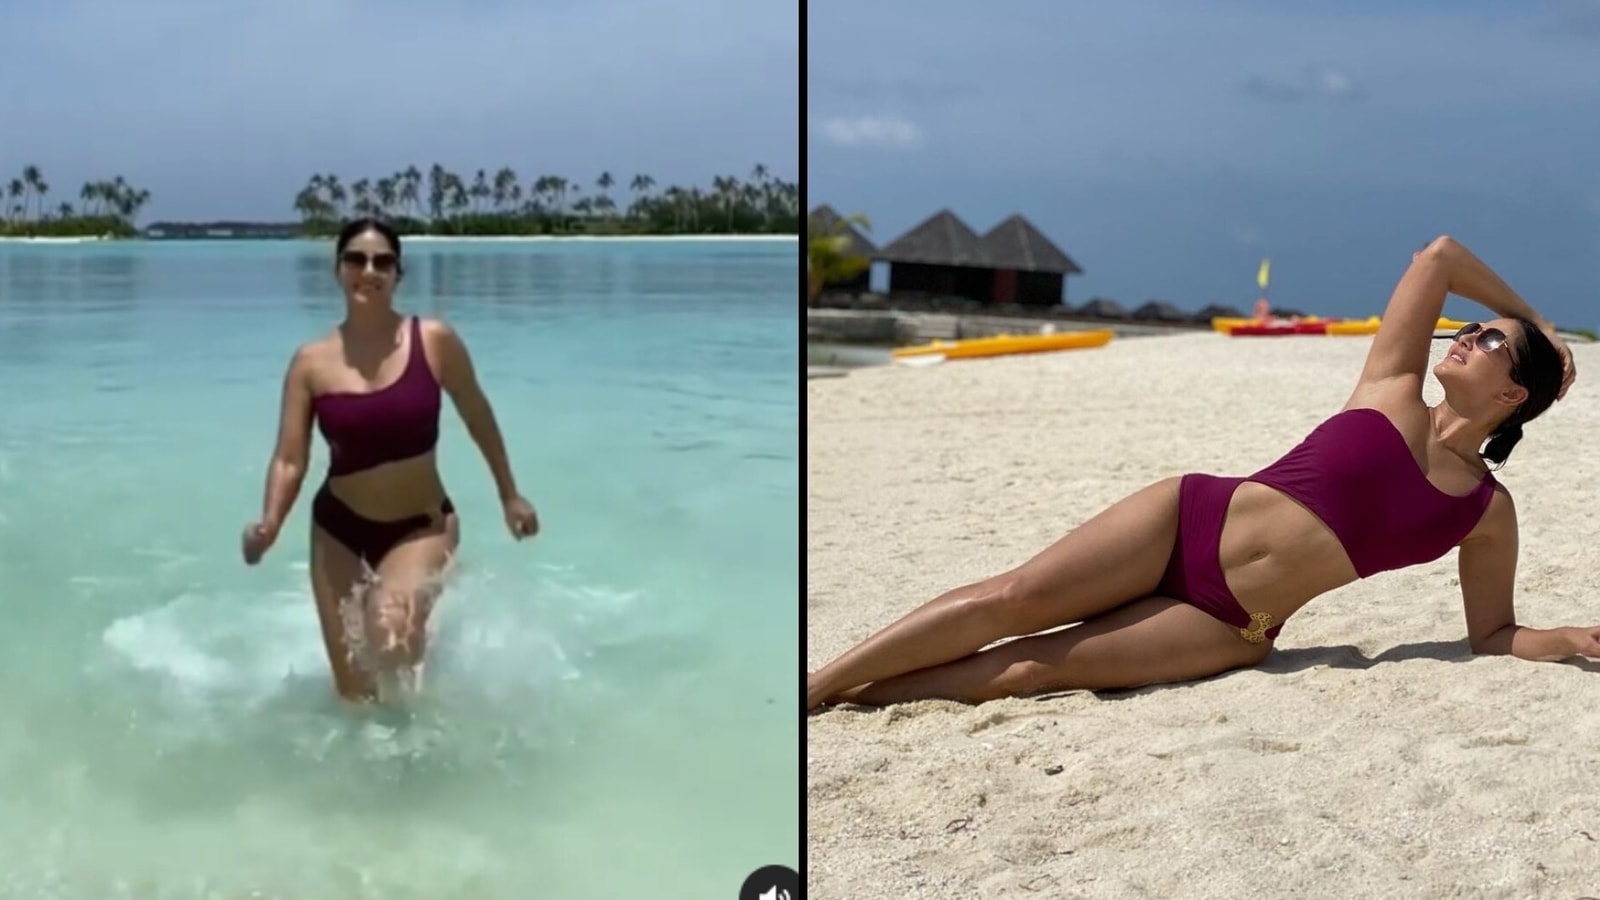 Shanilion Xxx Video - Sunny Leone does slo-mo run as she emerges from water, blows kiss. Watch  video from Maldives holiday | Bollywood - Hindustan Times